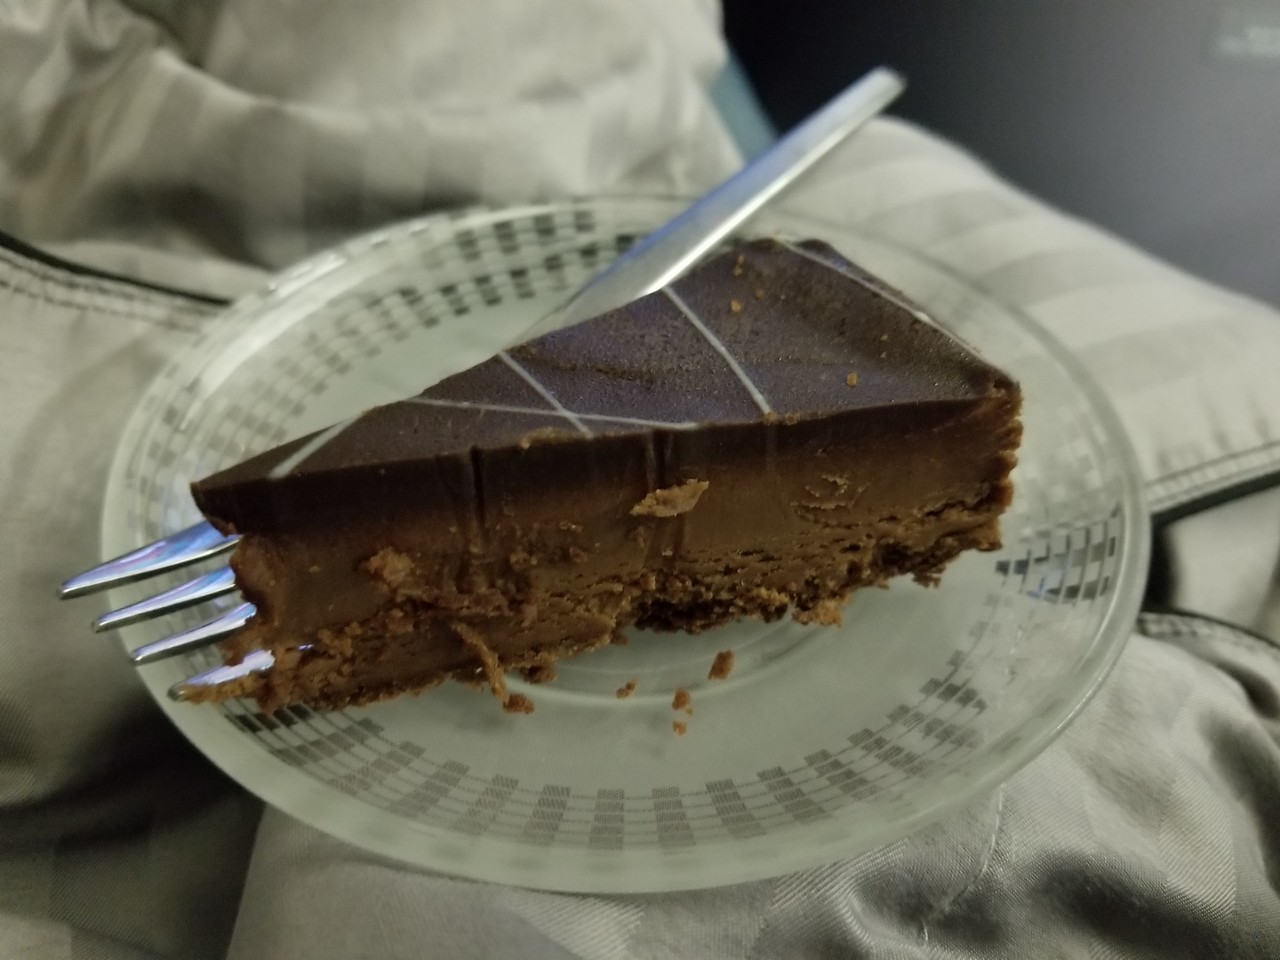 a piece of chocolate cake on a plate with a fork